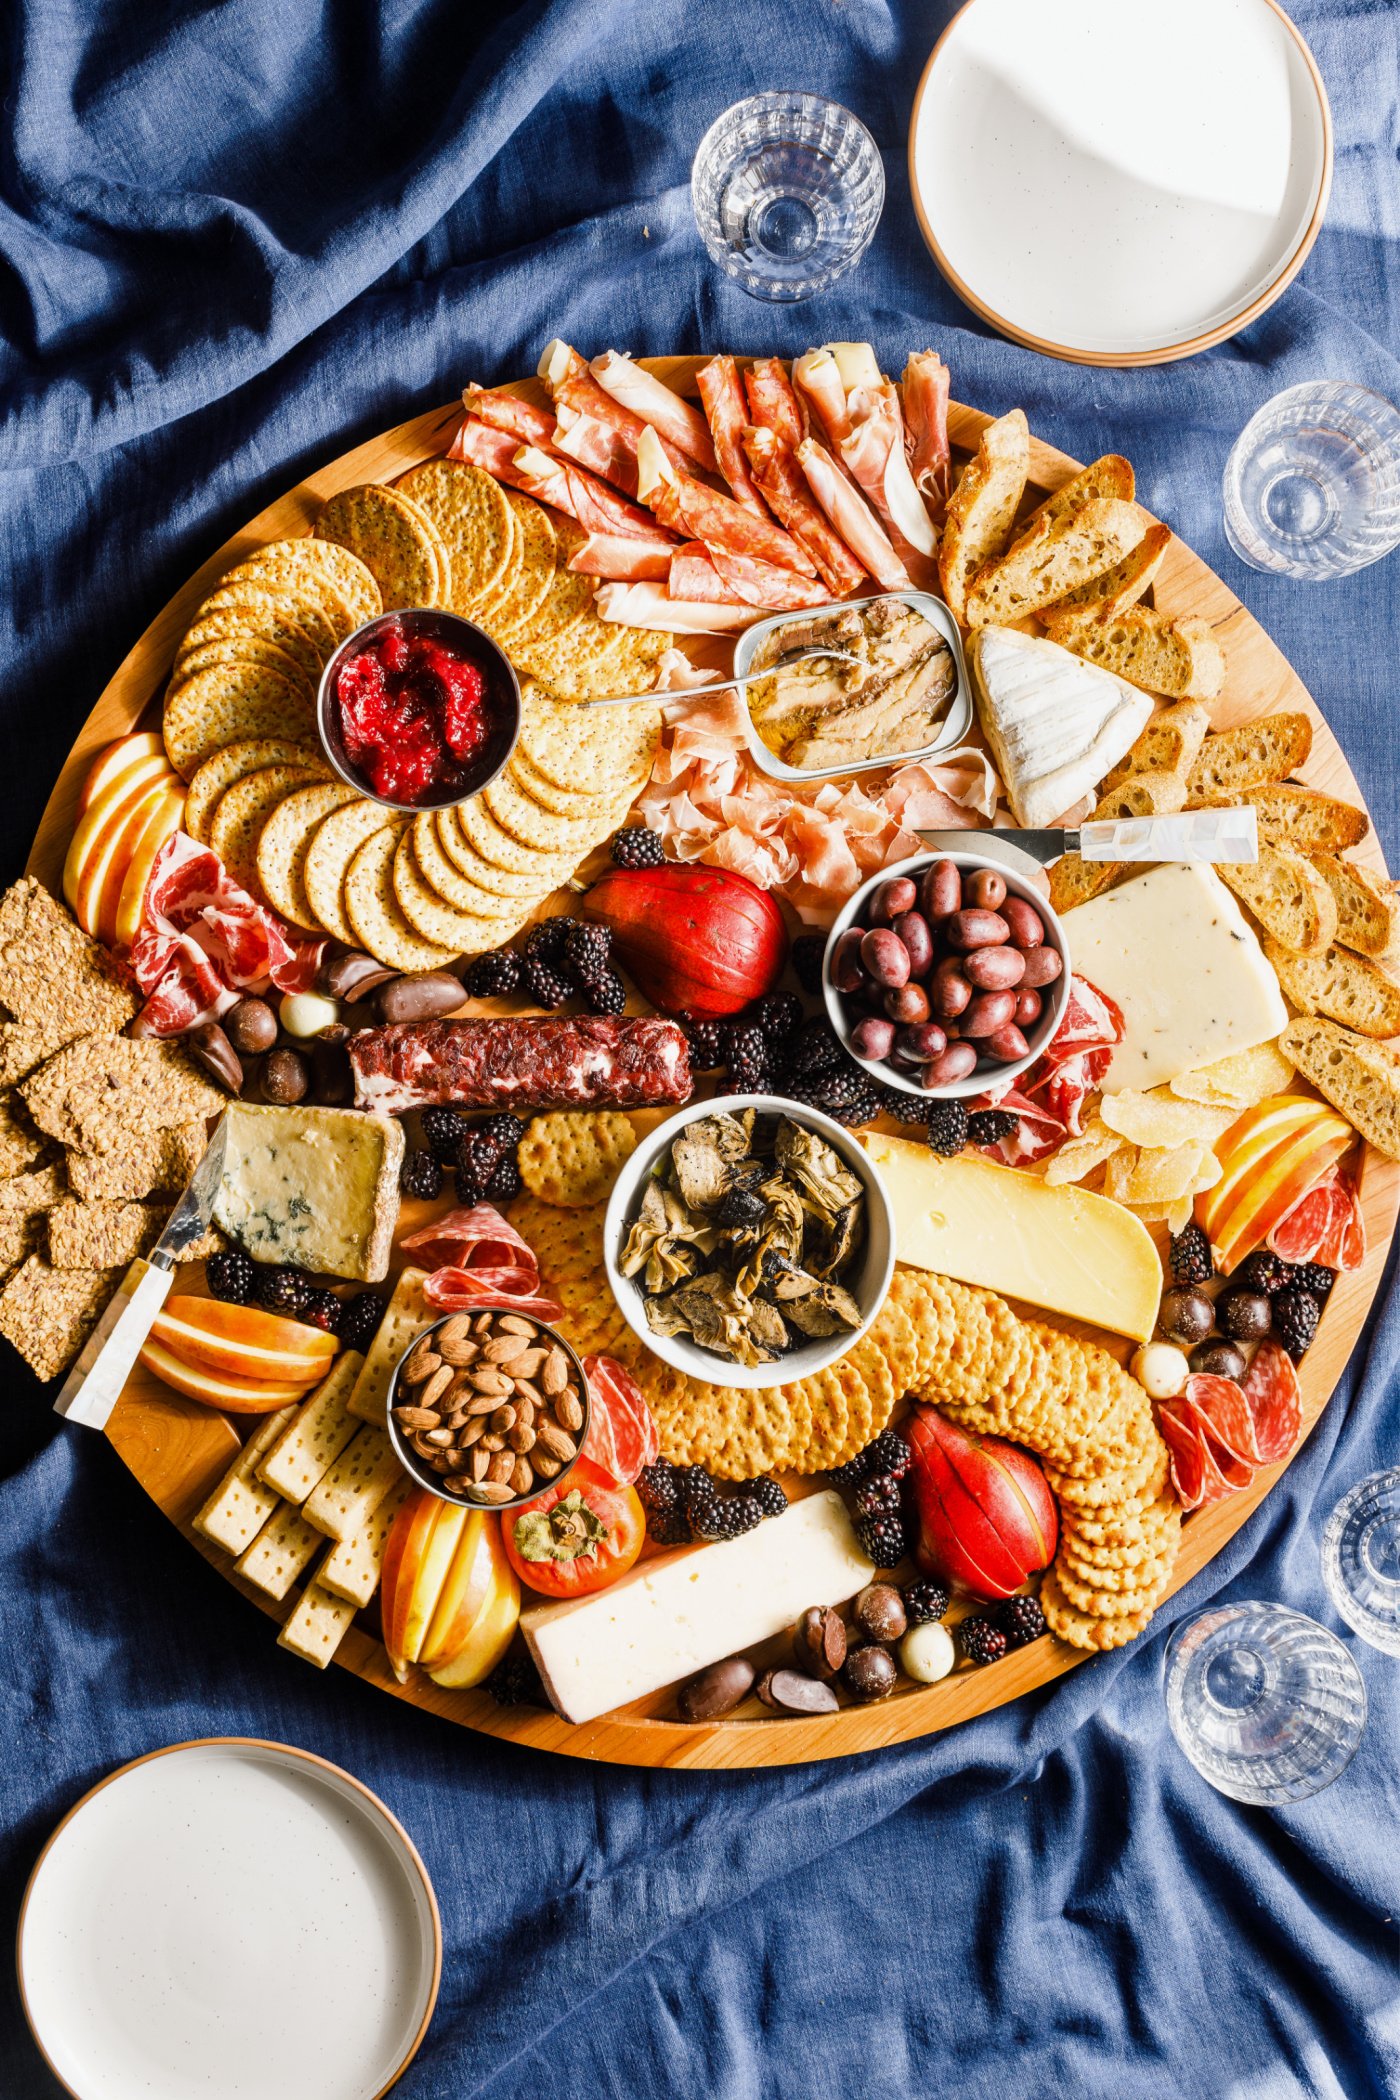 https://reluctantentertainer.com/wp-content/uploads/2022/12/TJ-cheese-board.jpeg